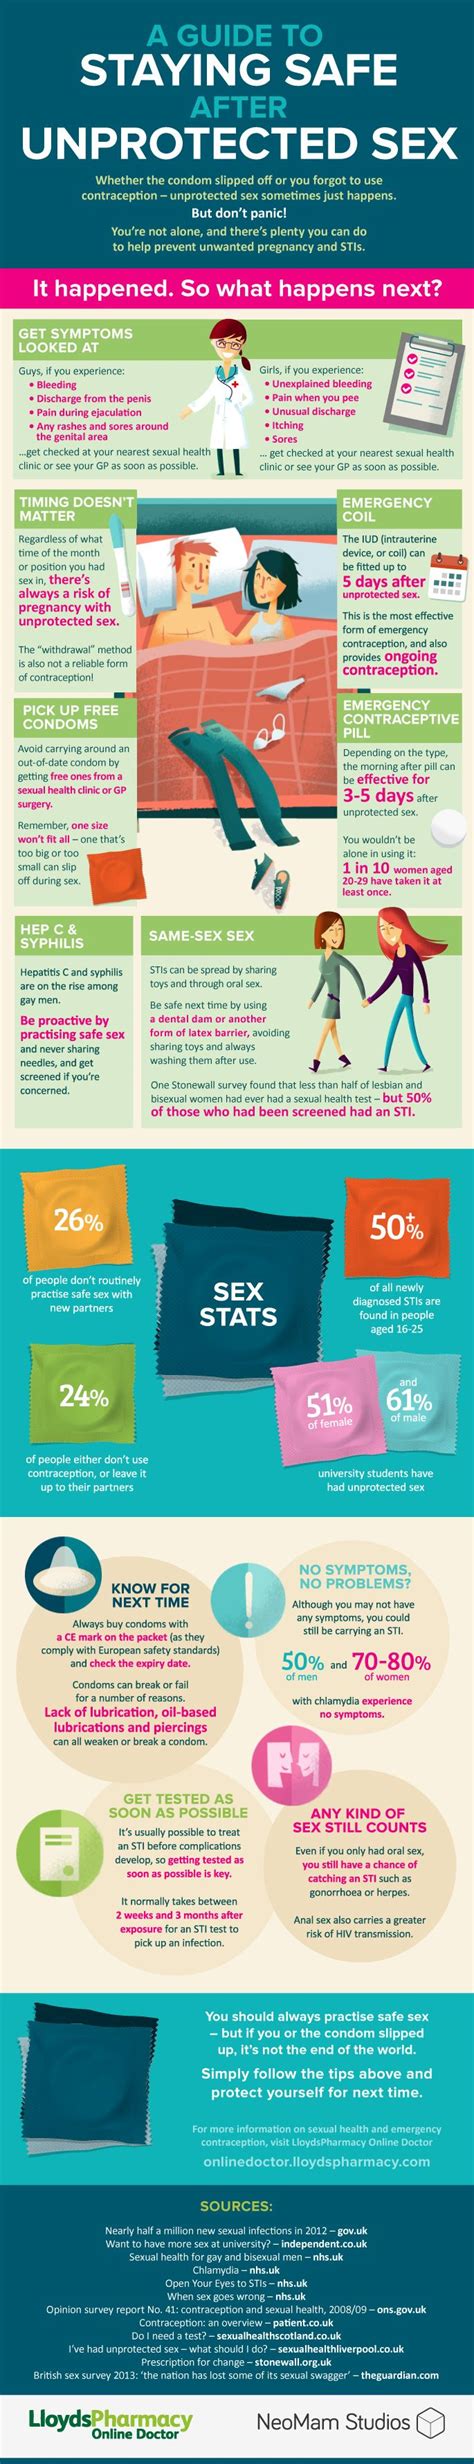 a guide to staying safe after unprotected sex infographic ~ visualistan